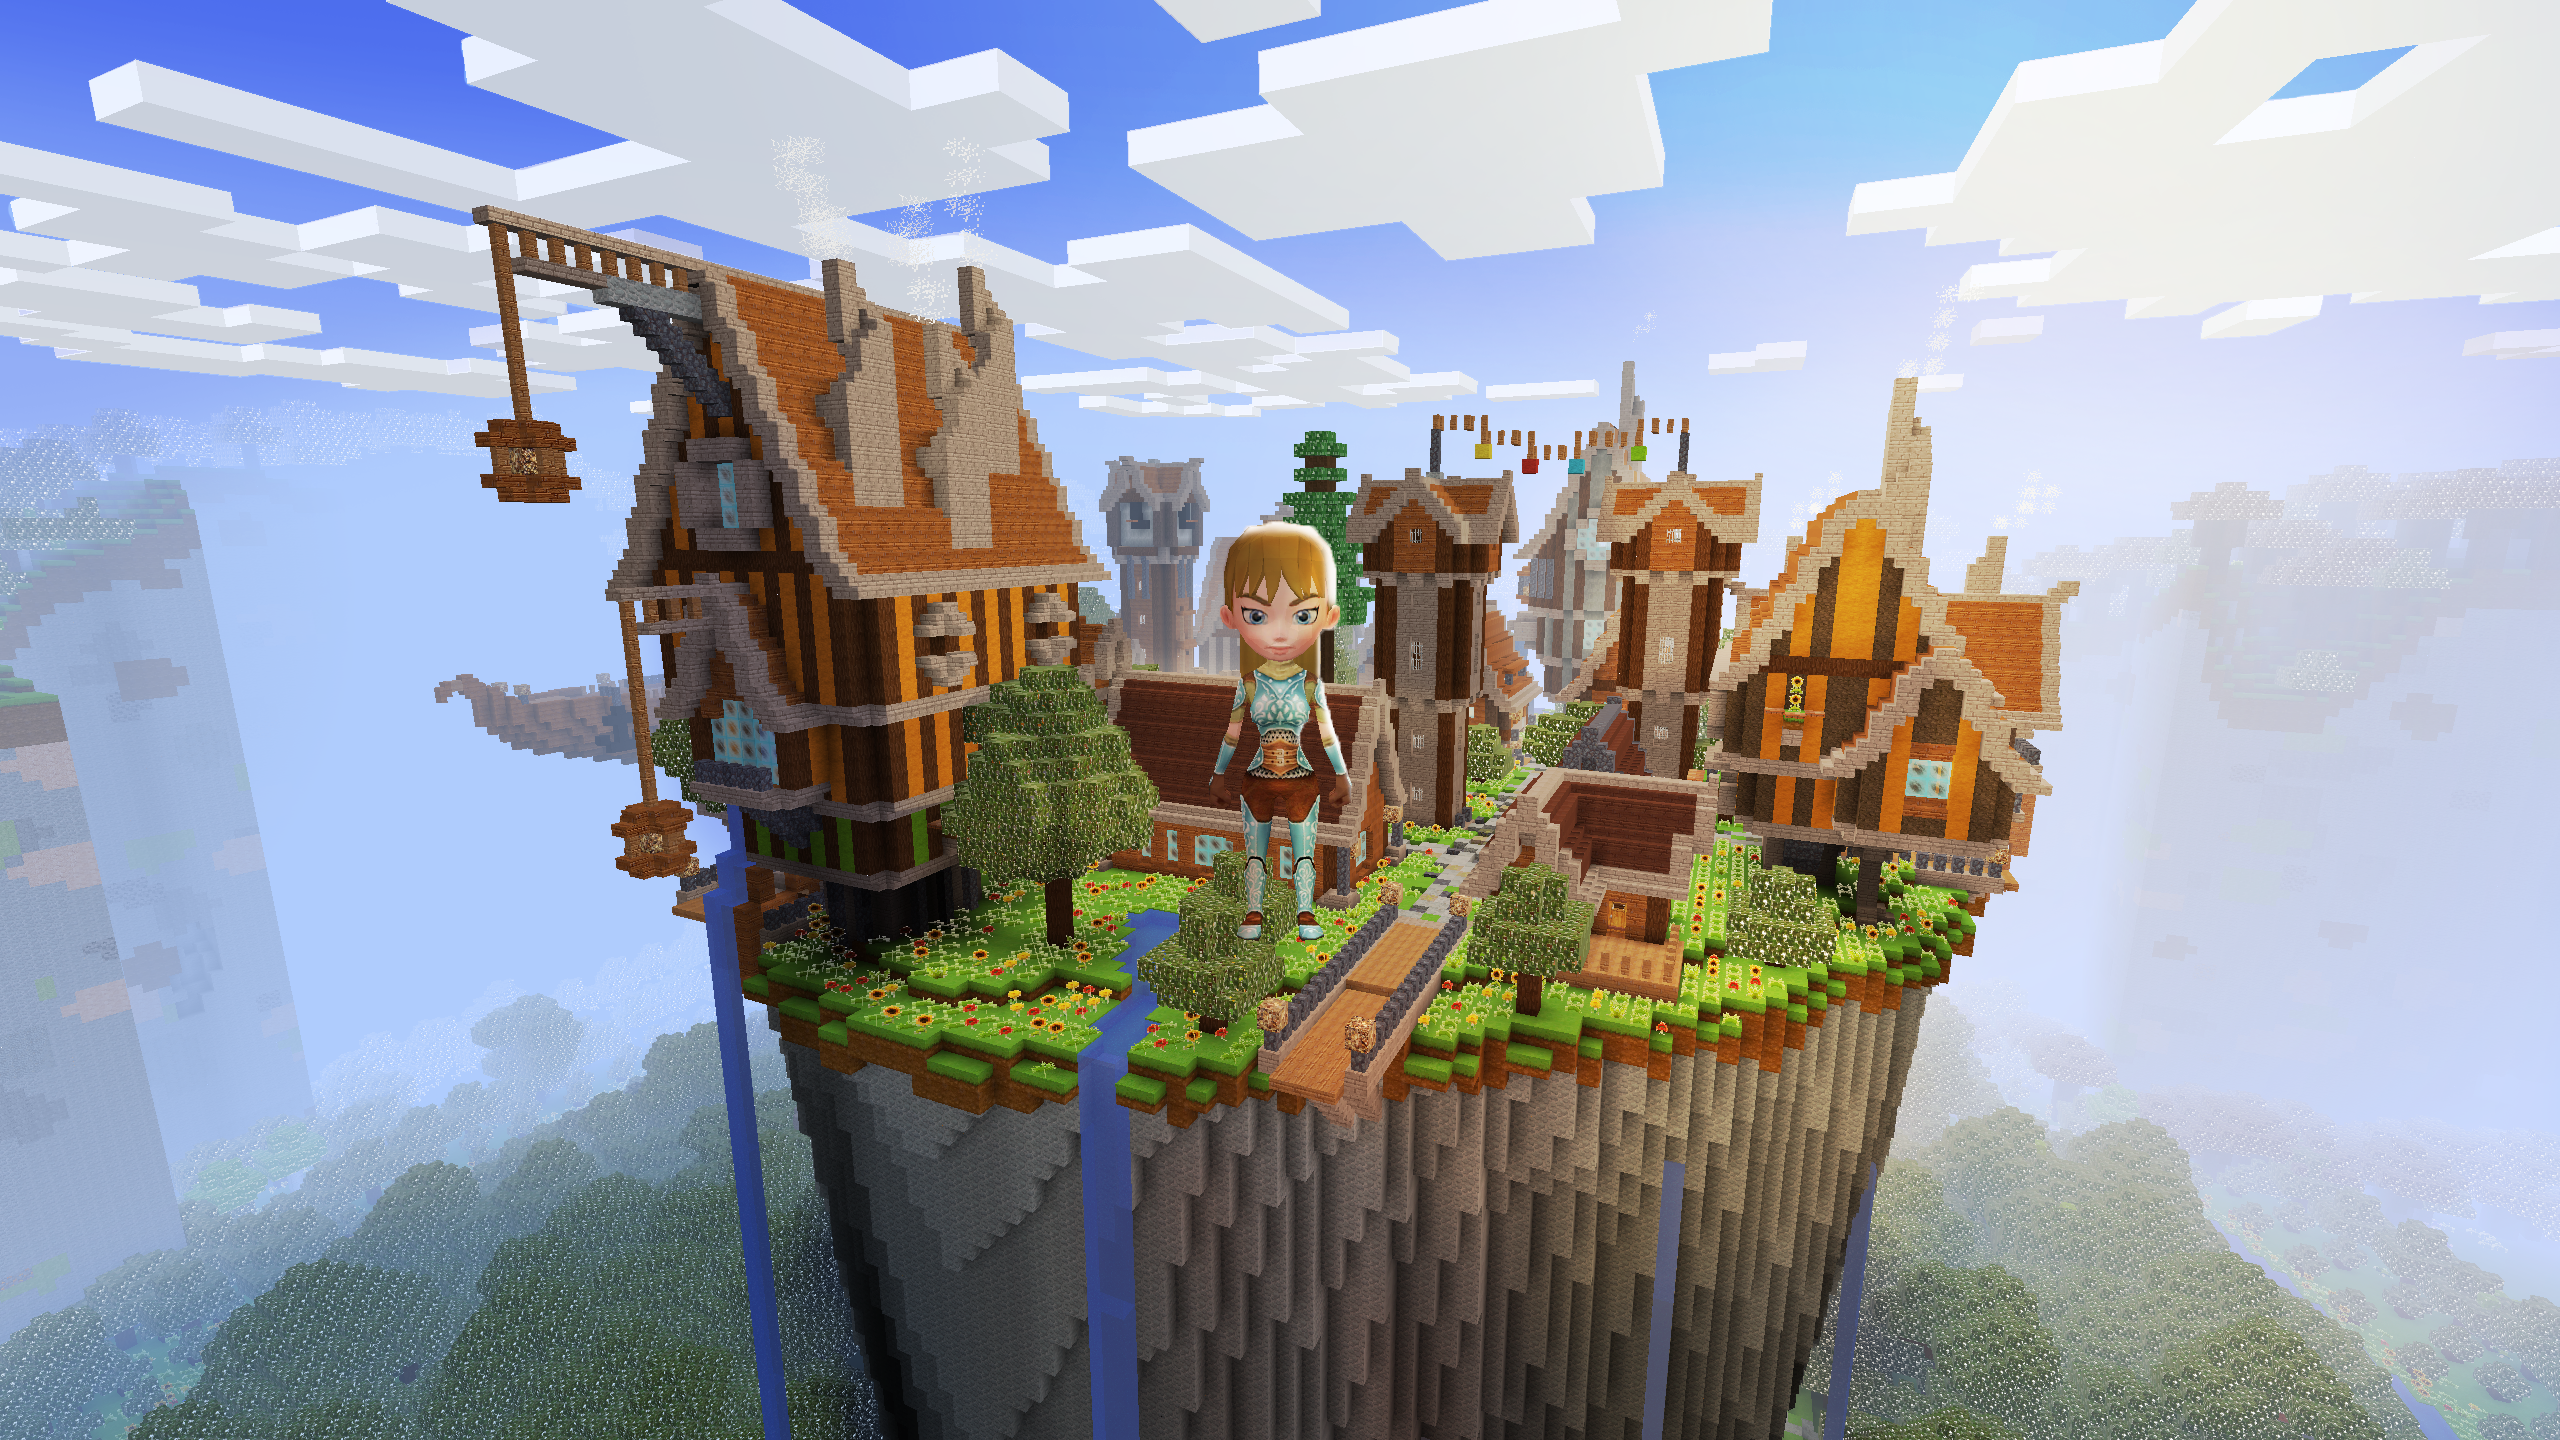 Wallpaper, Minecraft, Video Game Art, Video Game Landscape, tree house, video games 2560x1440